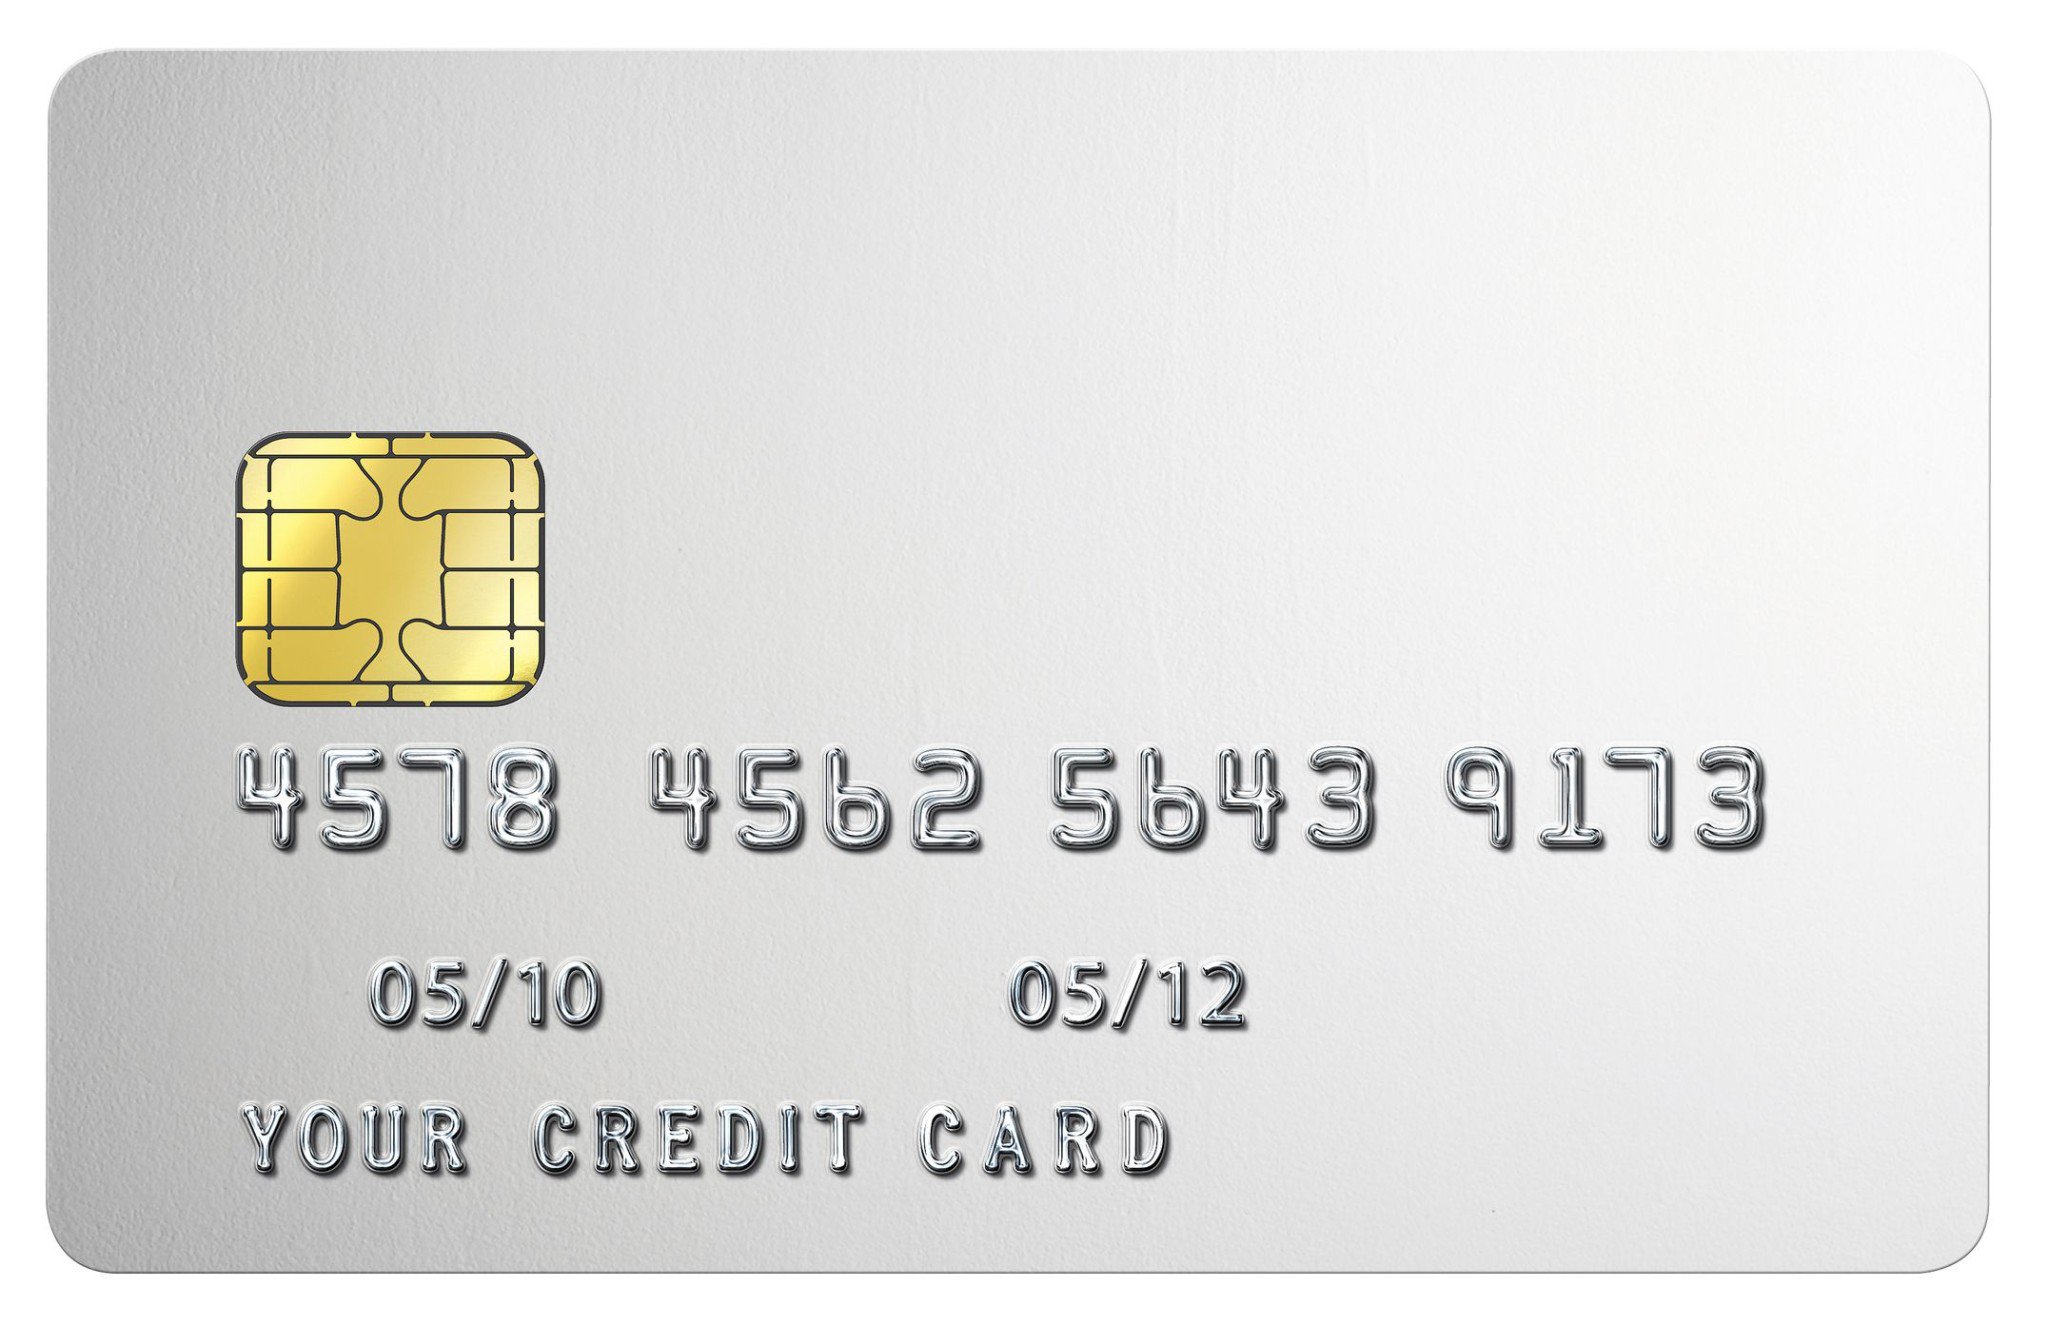 Gcs Credit Union On Twitter Have You Ever Wondered What Makes Up Your Credit Card Number Https T Co Tlfbxpcbrn